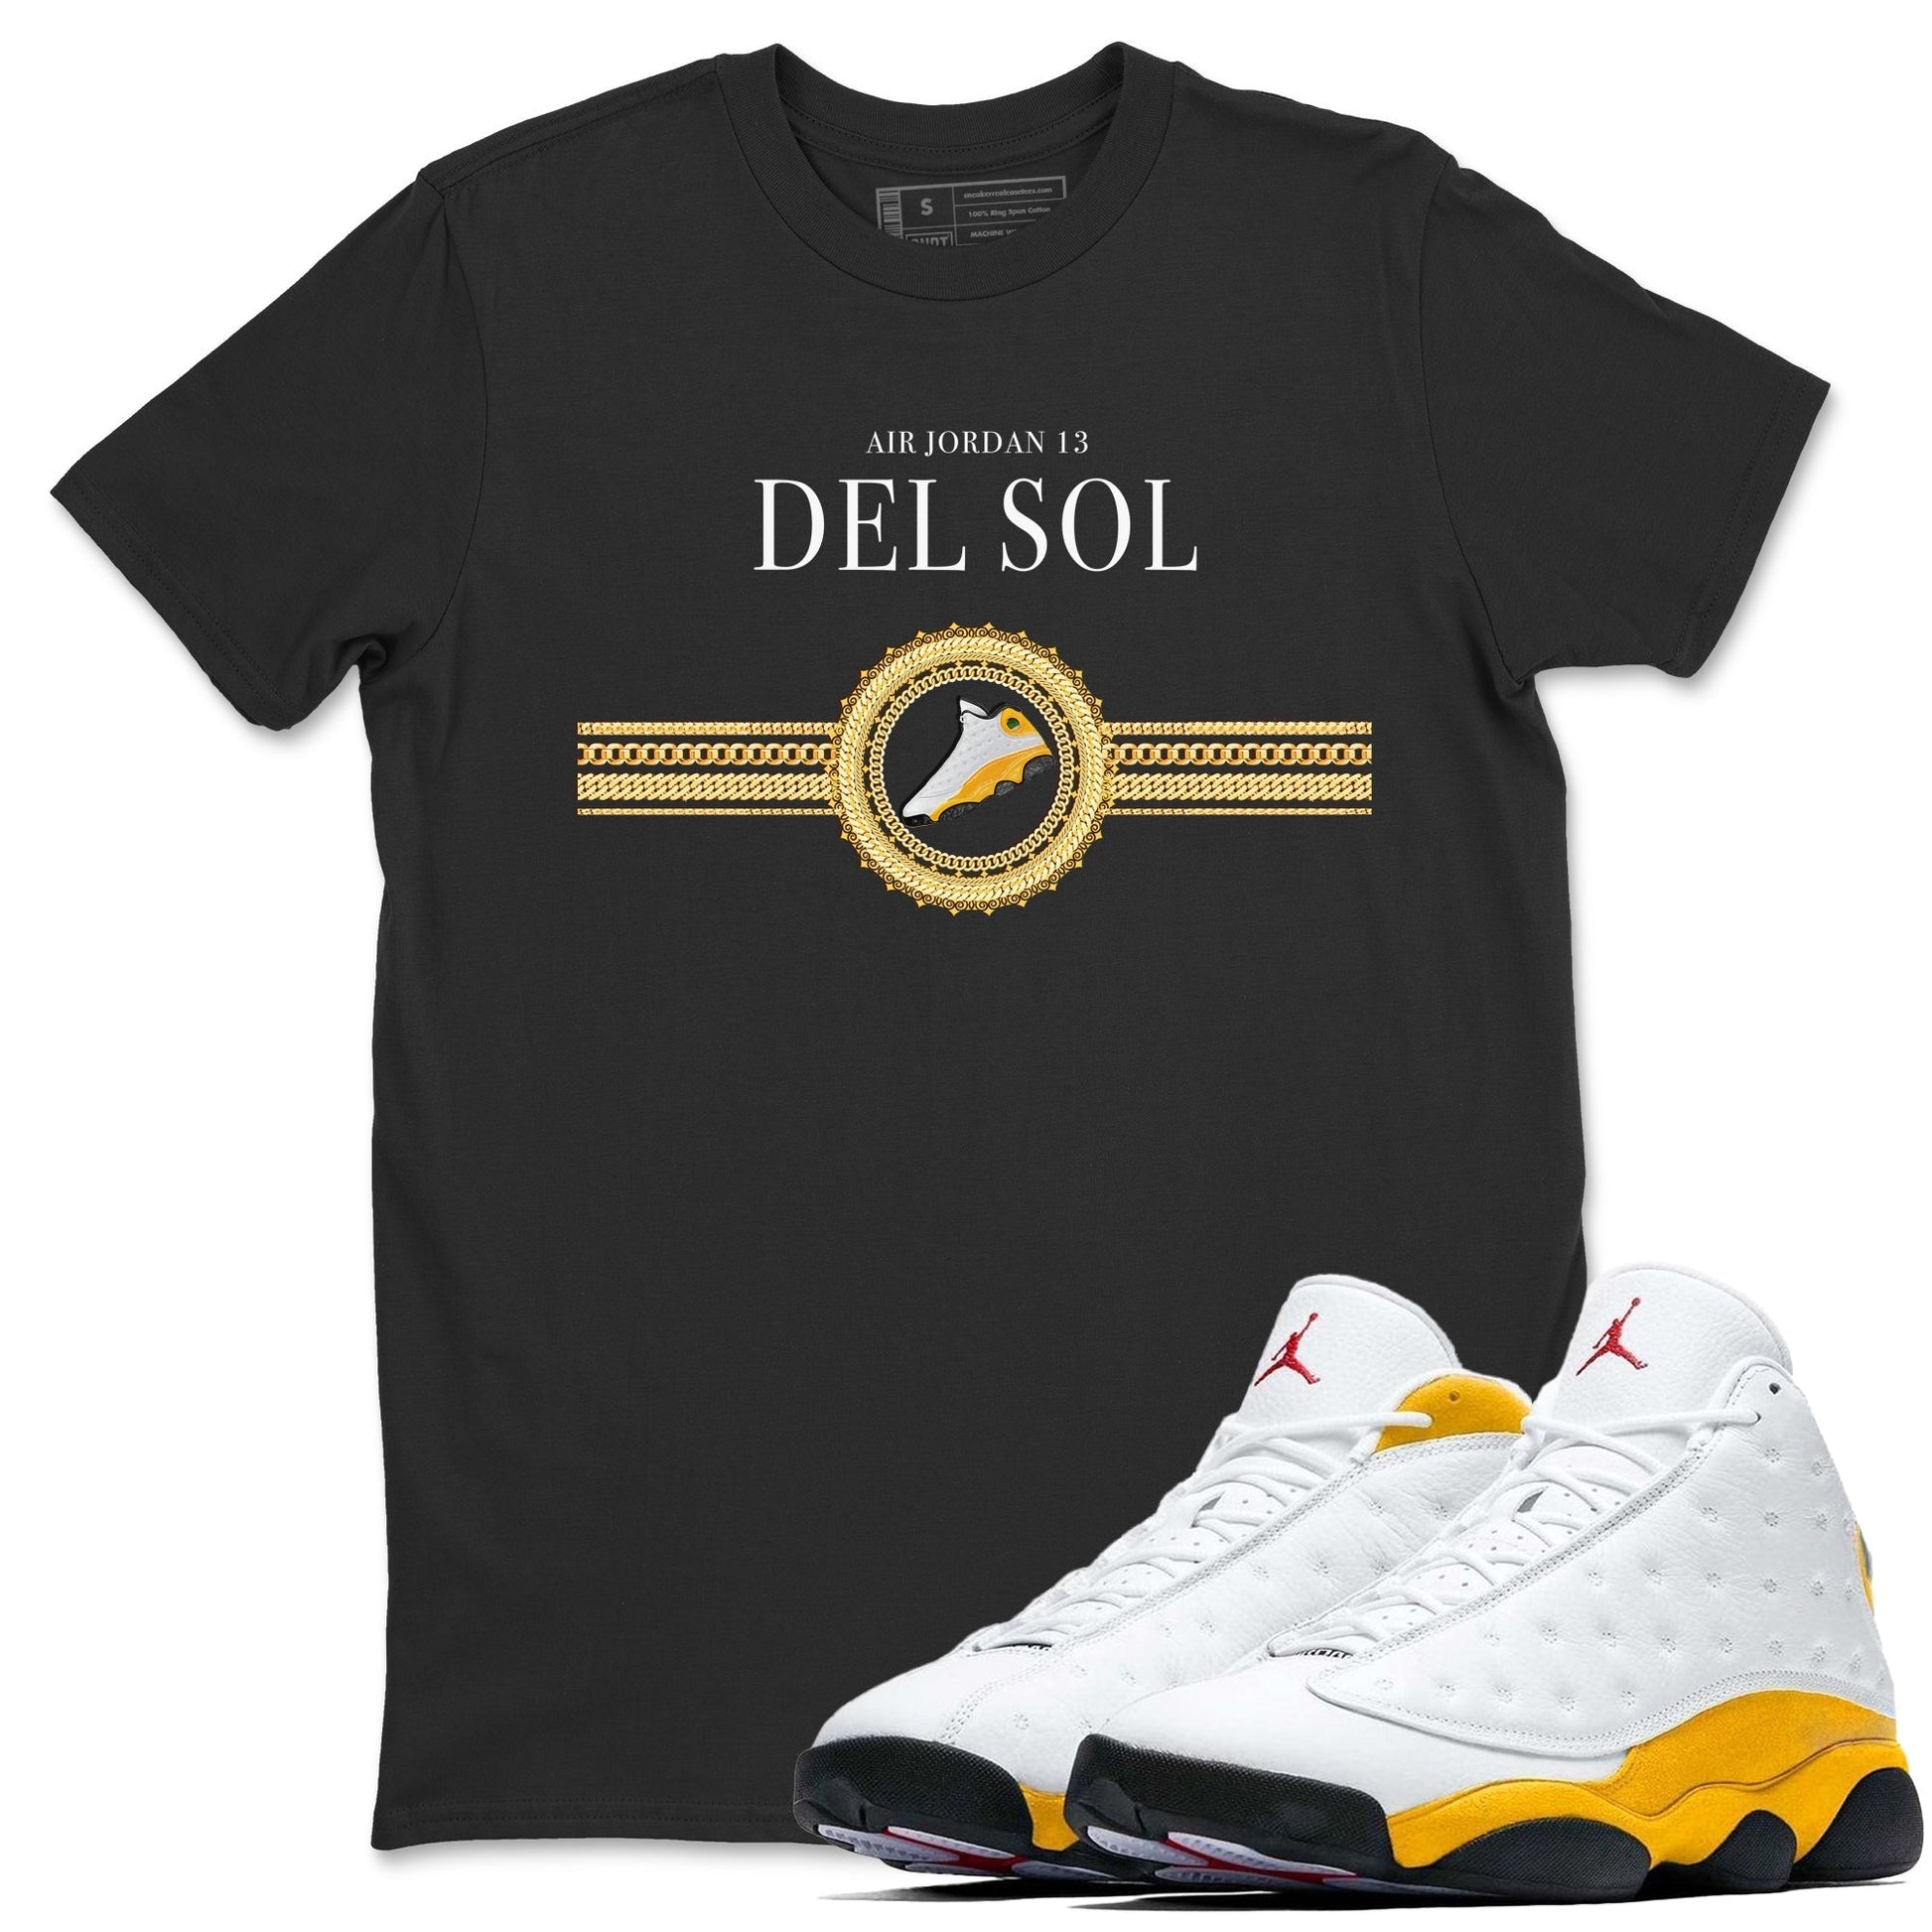 Yellow Gold IT IS T Shirt for Air Jordan 13 Del Sol University Gold White 1  12 Sneaker Match Tee